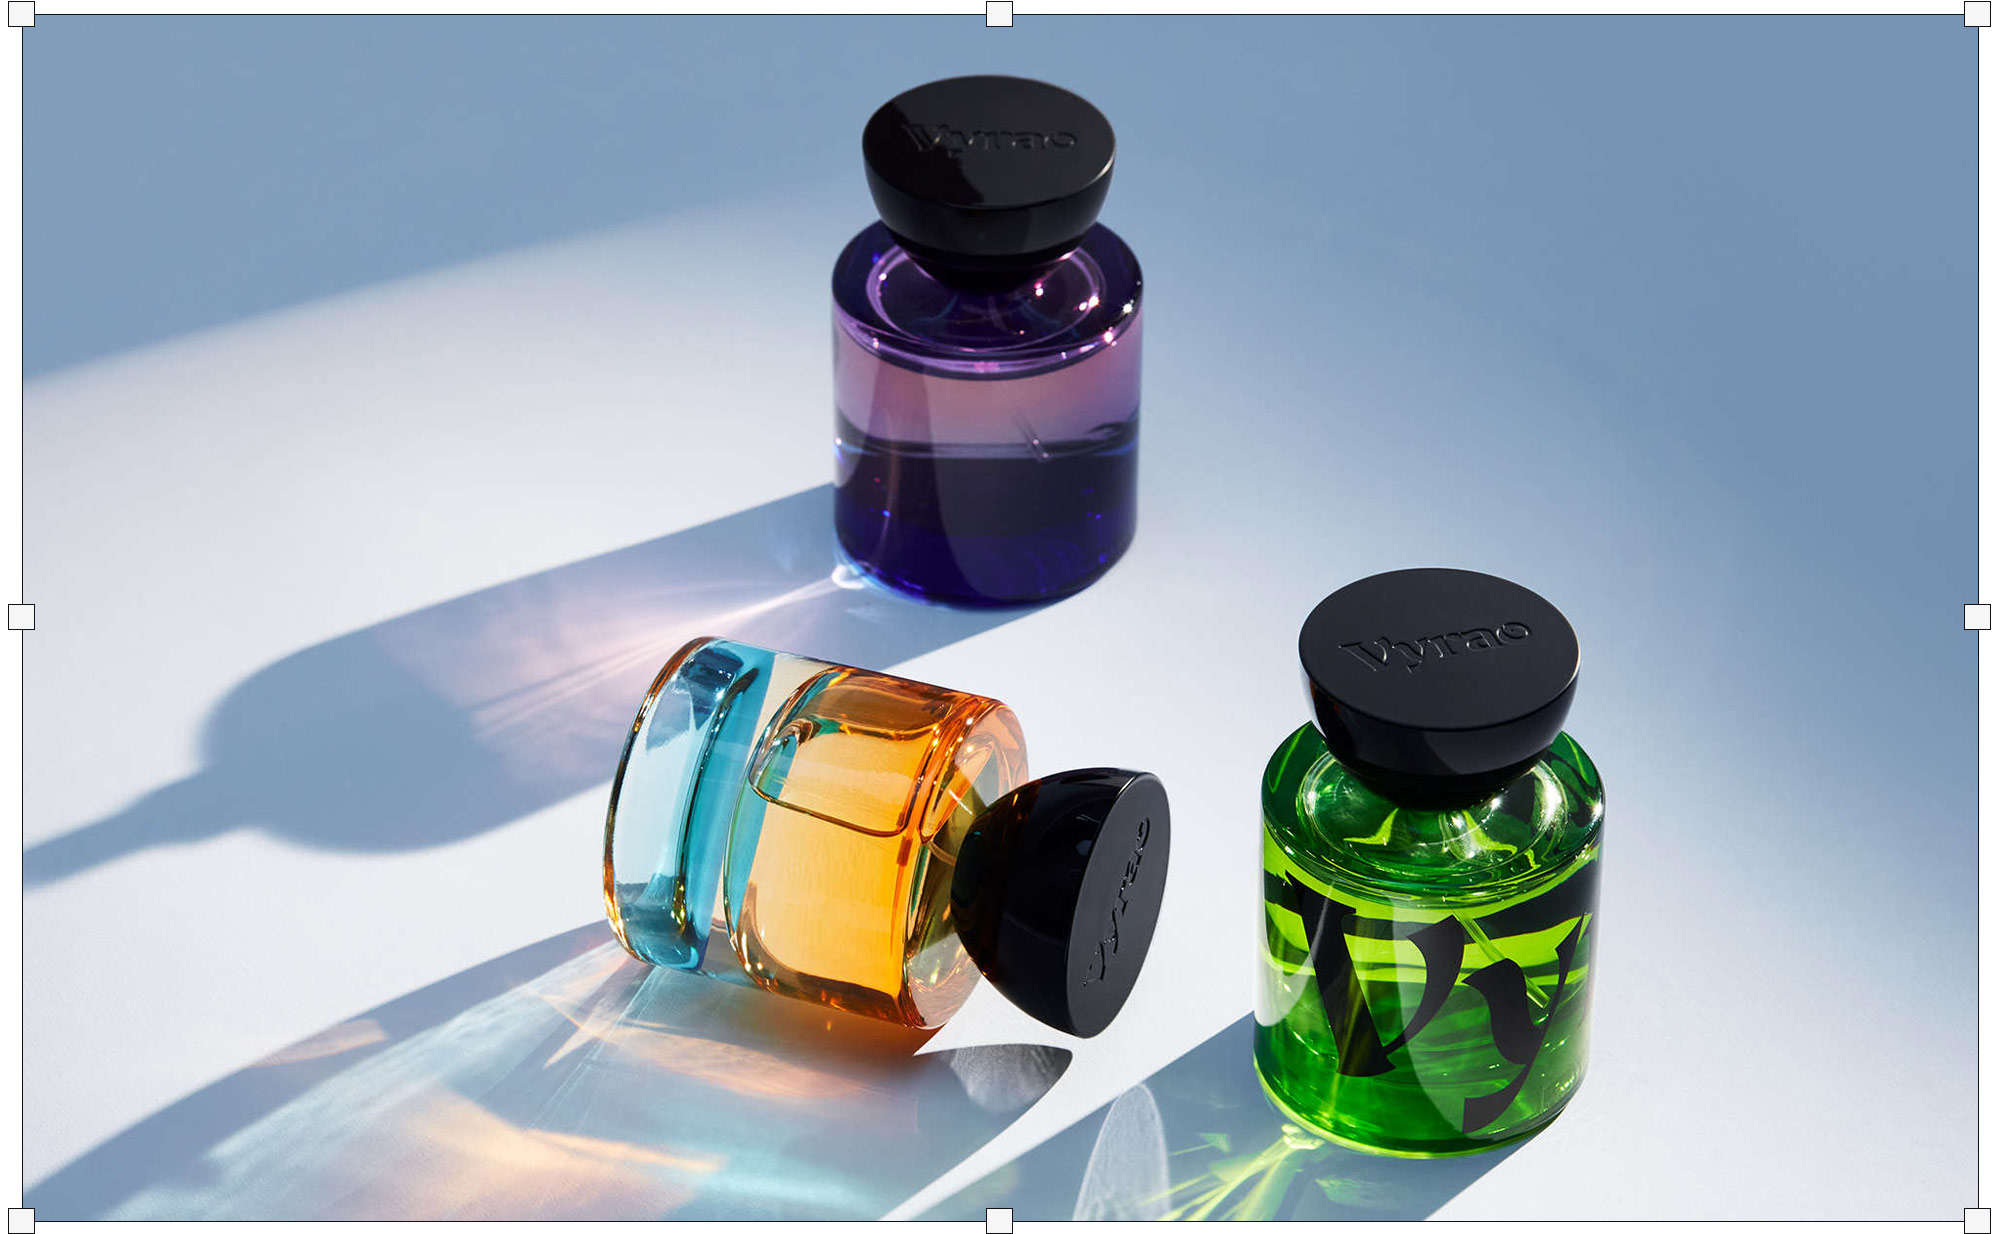 Customise a scent of your own with Louis Vuitton's bespoke fragrances